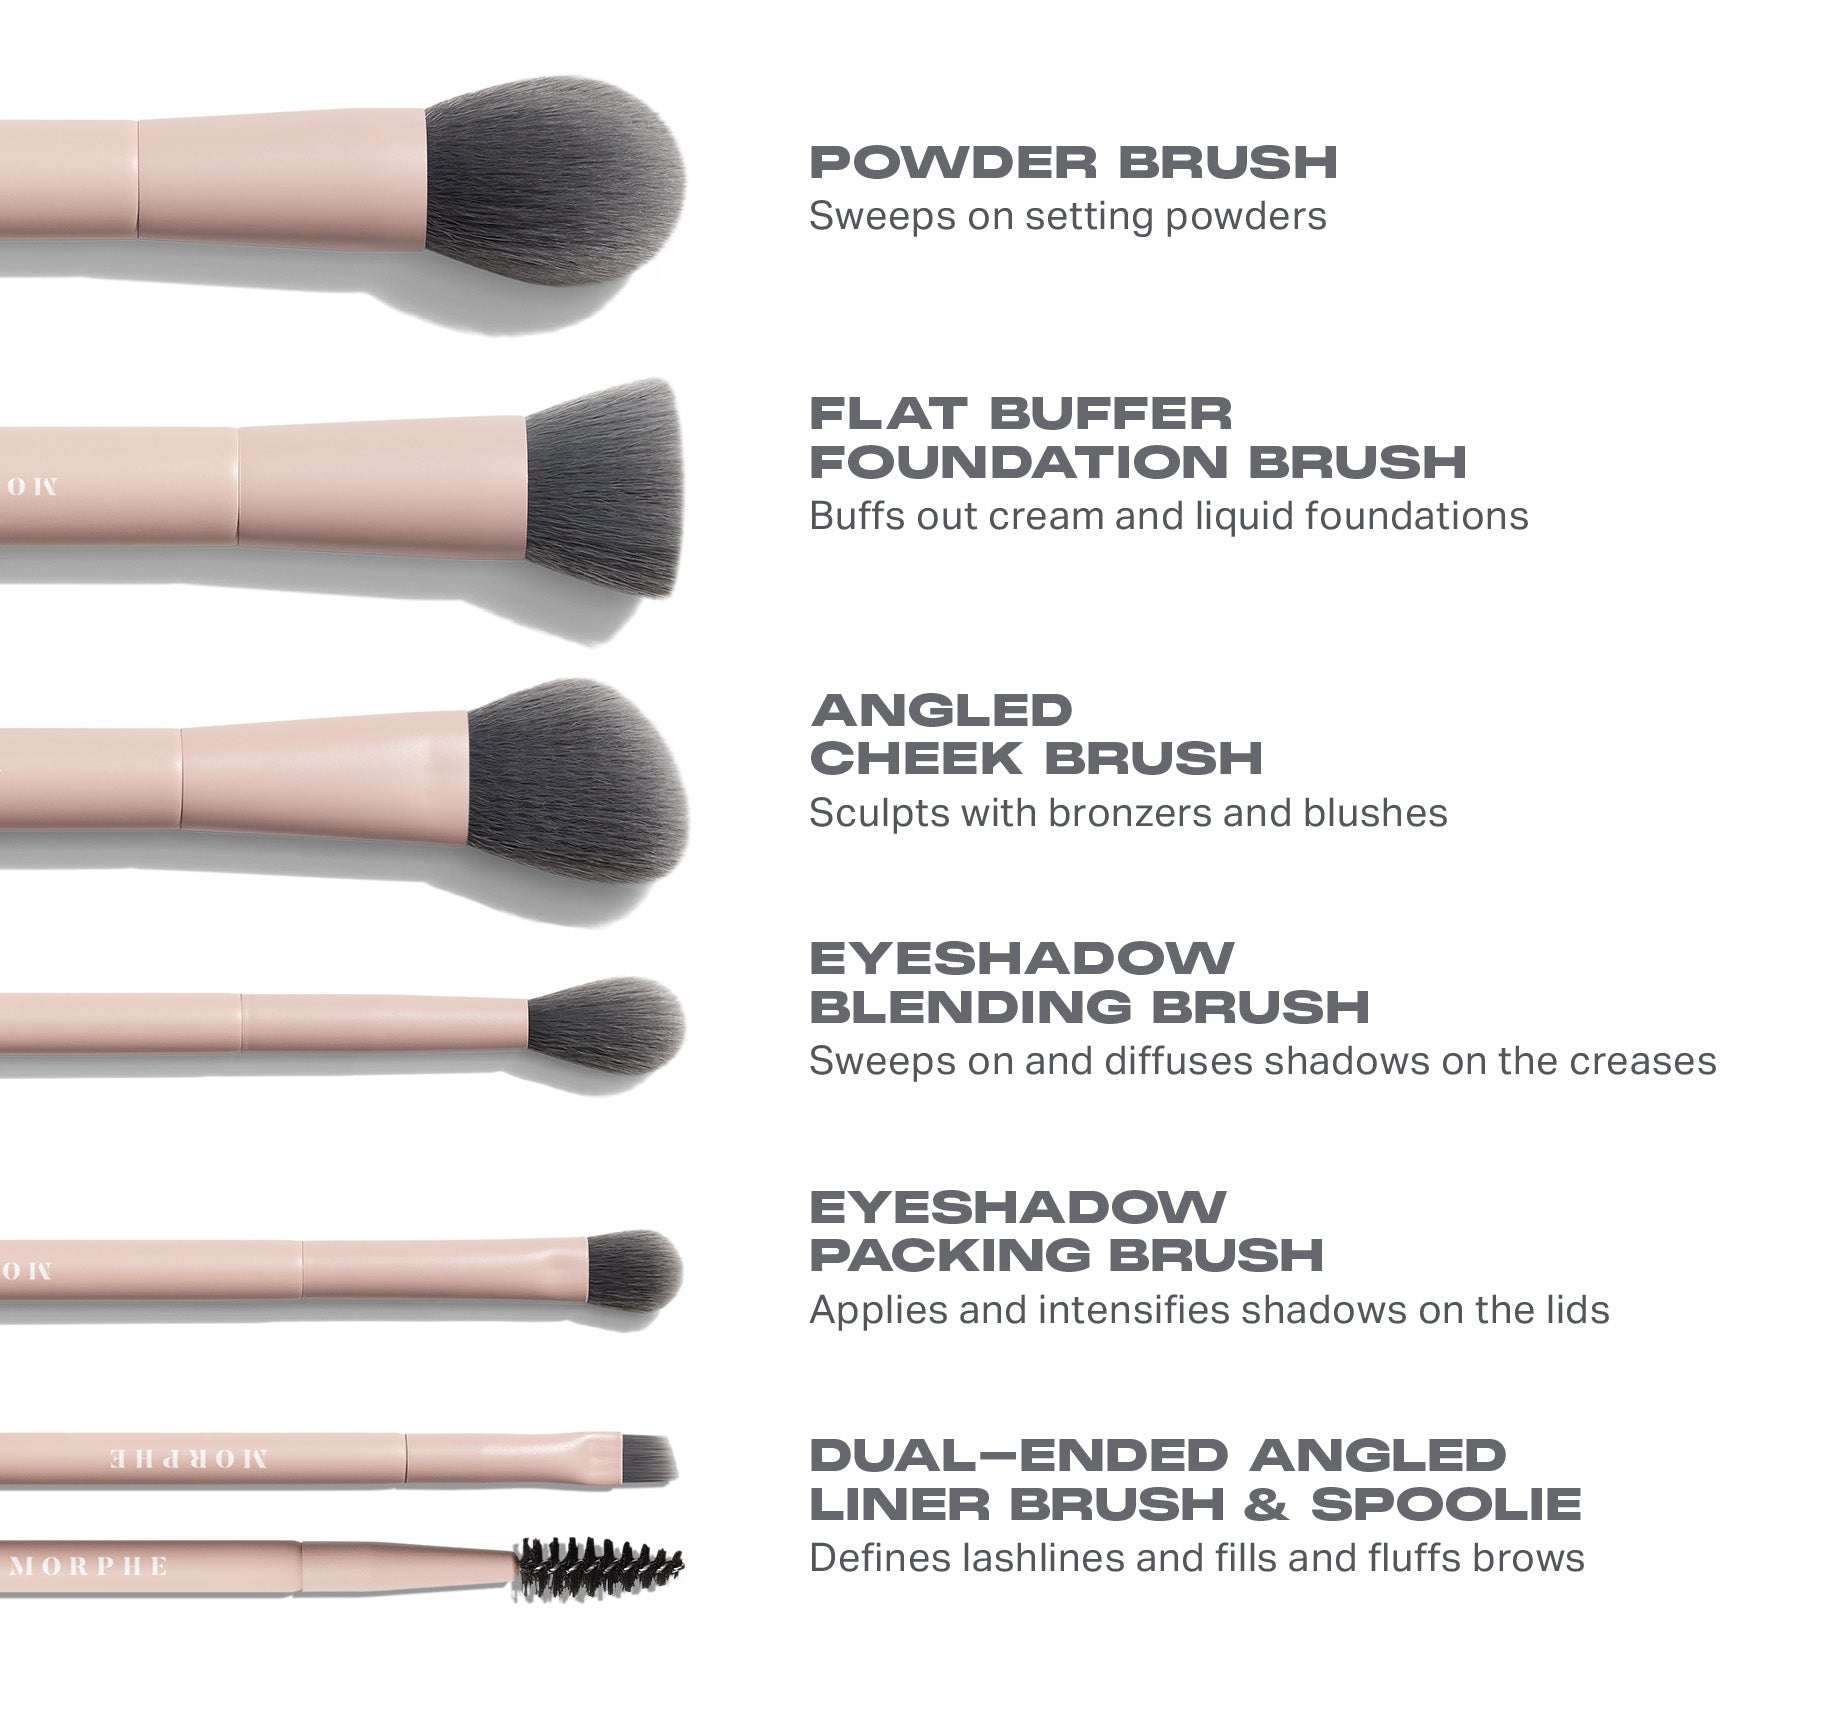 Travel Shaping Essentials Bamboo & Charcoal Infused Travel Brush Set - Image 2